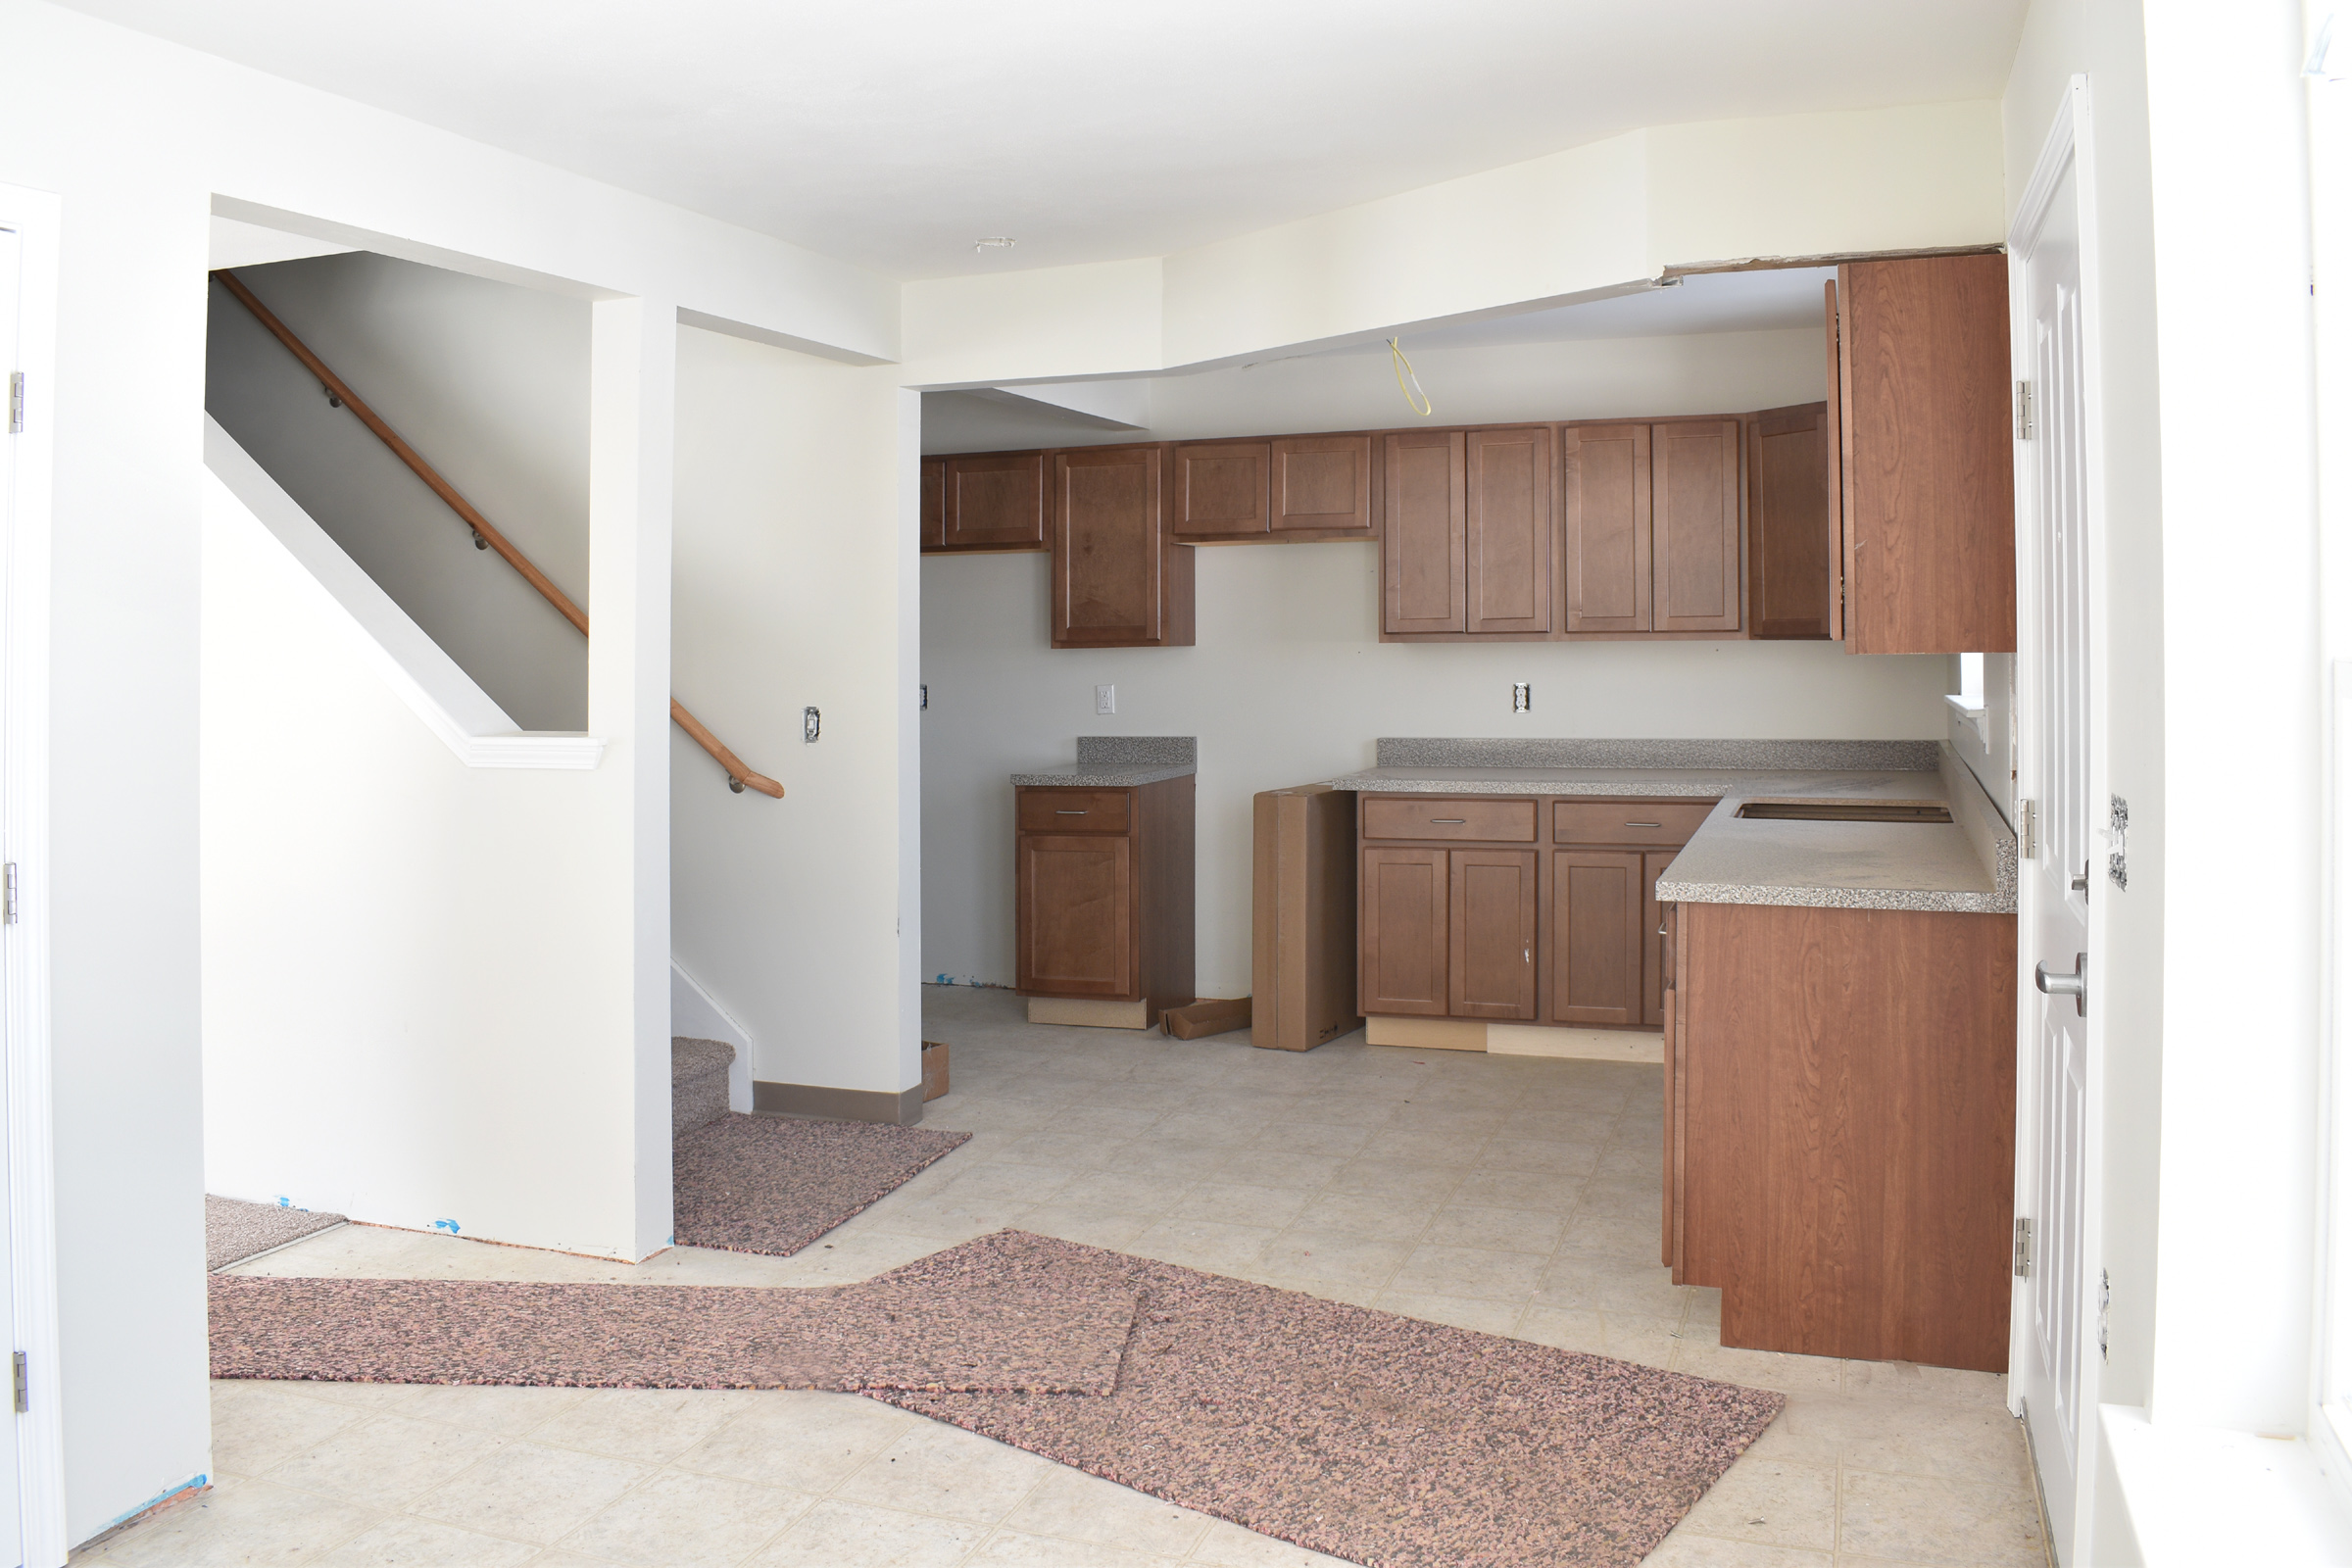 property management company client list syracuse ny kitchen and entryroom image during construction of selkirk townhome